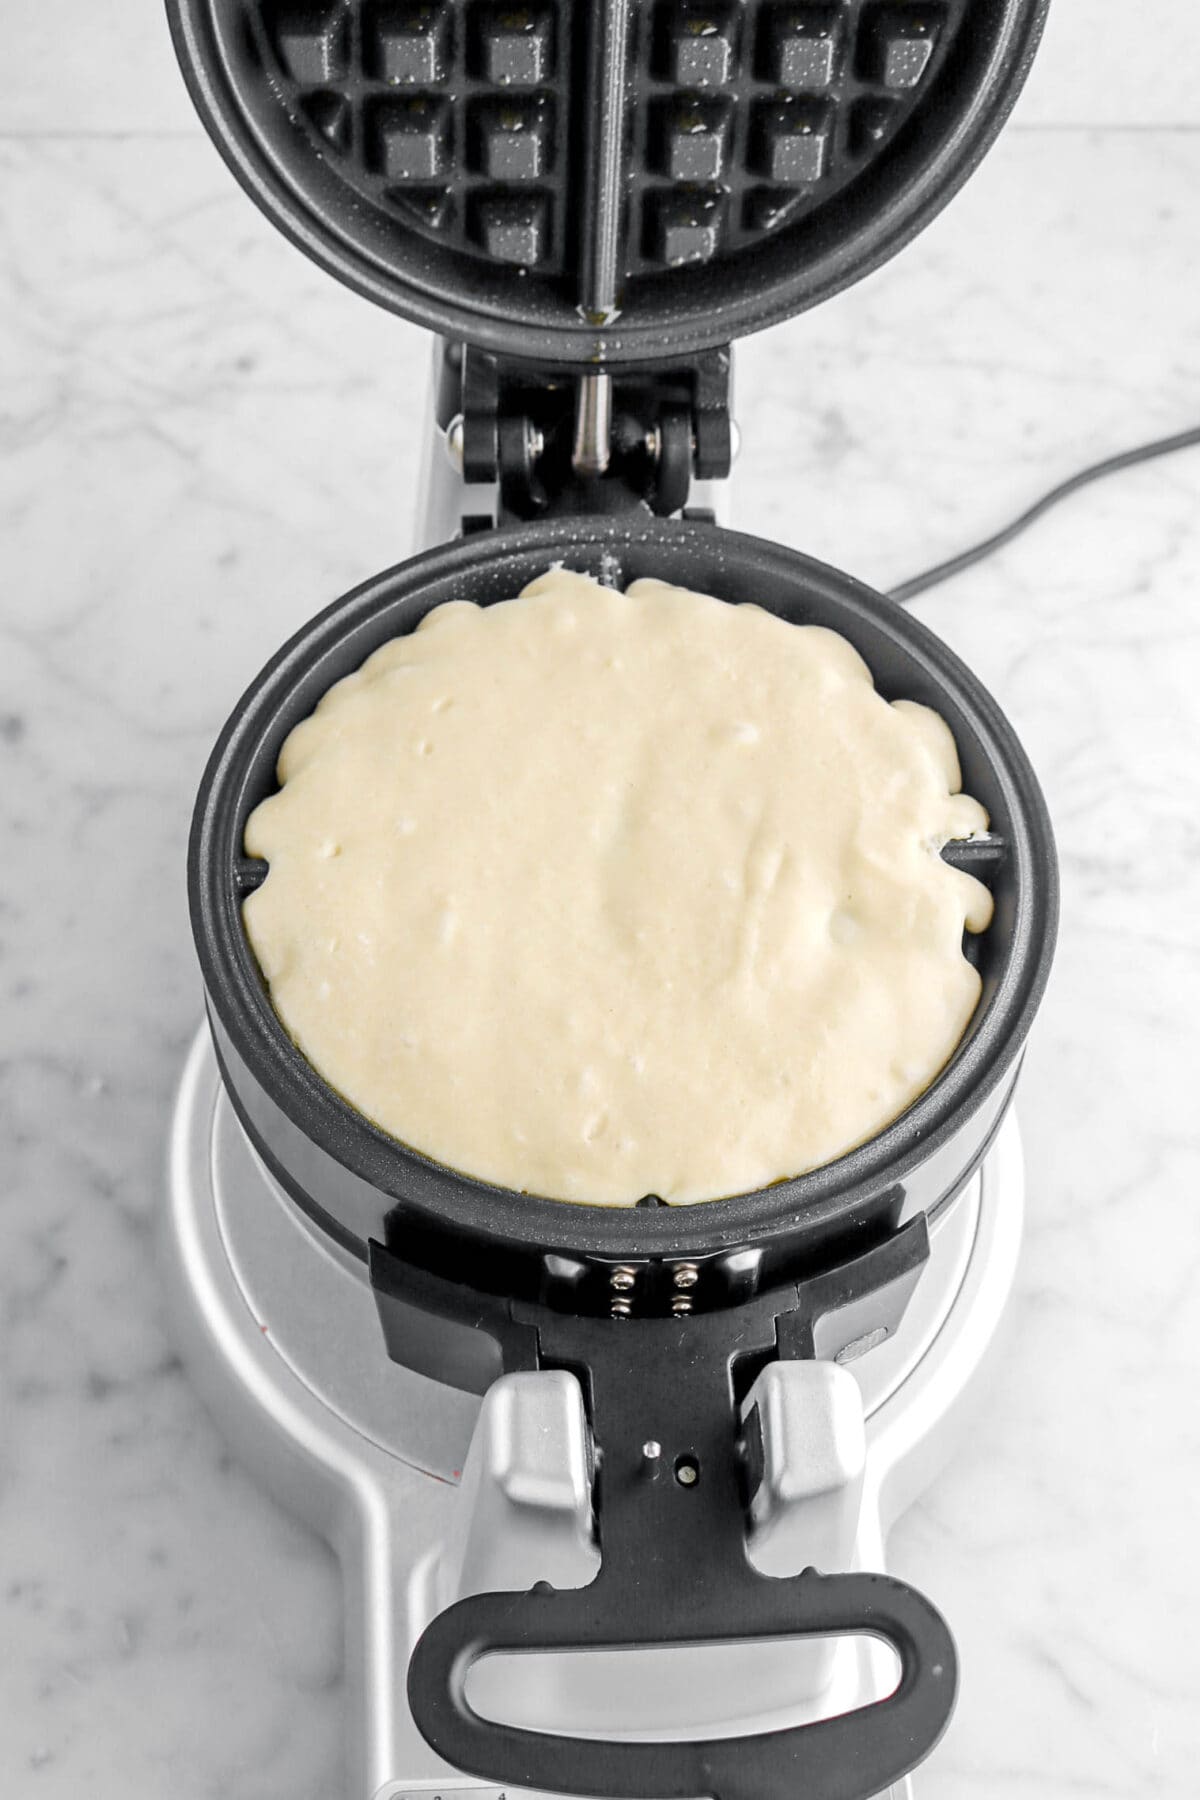 batter in waffle iron.